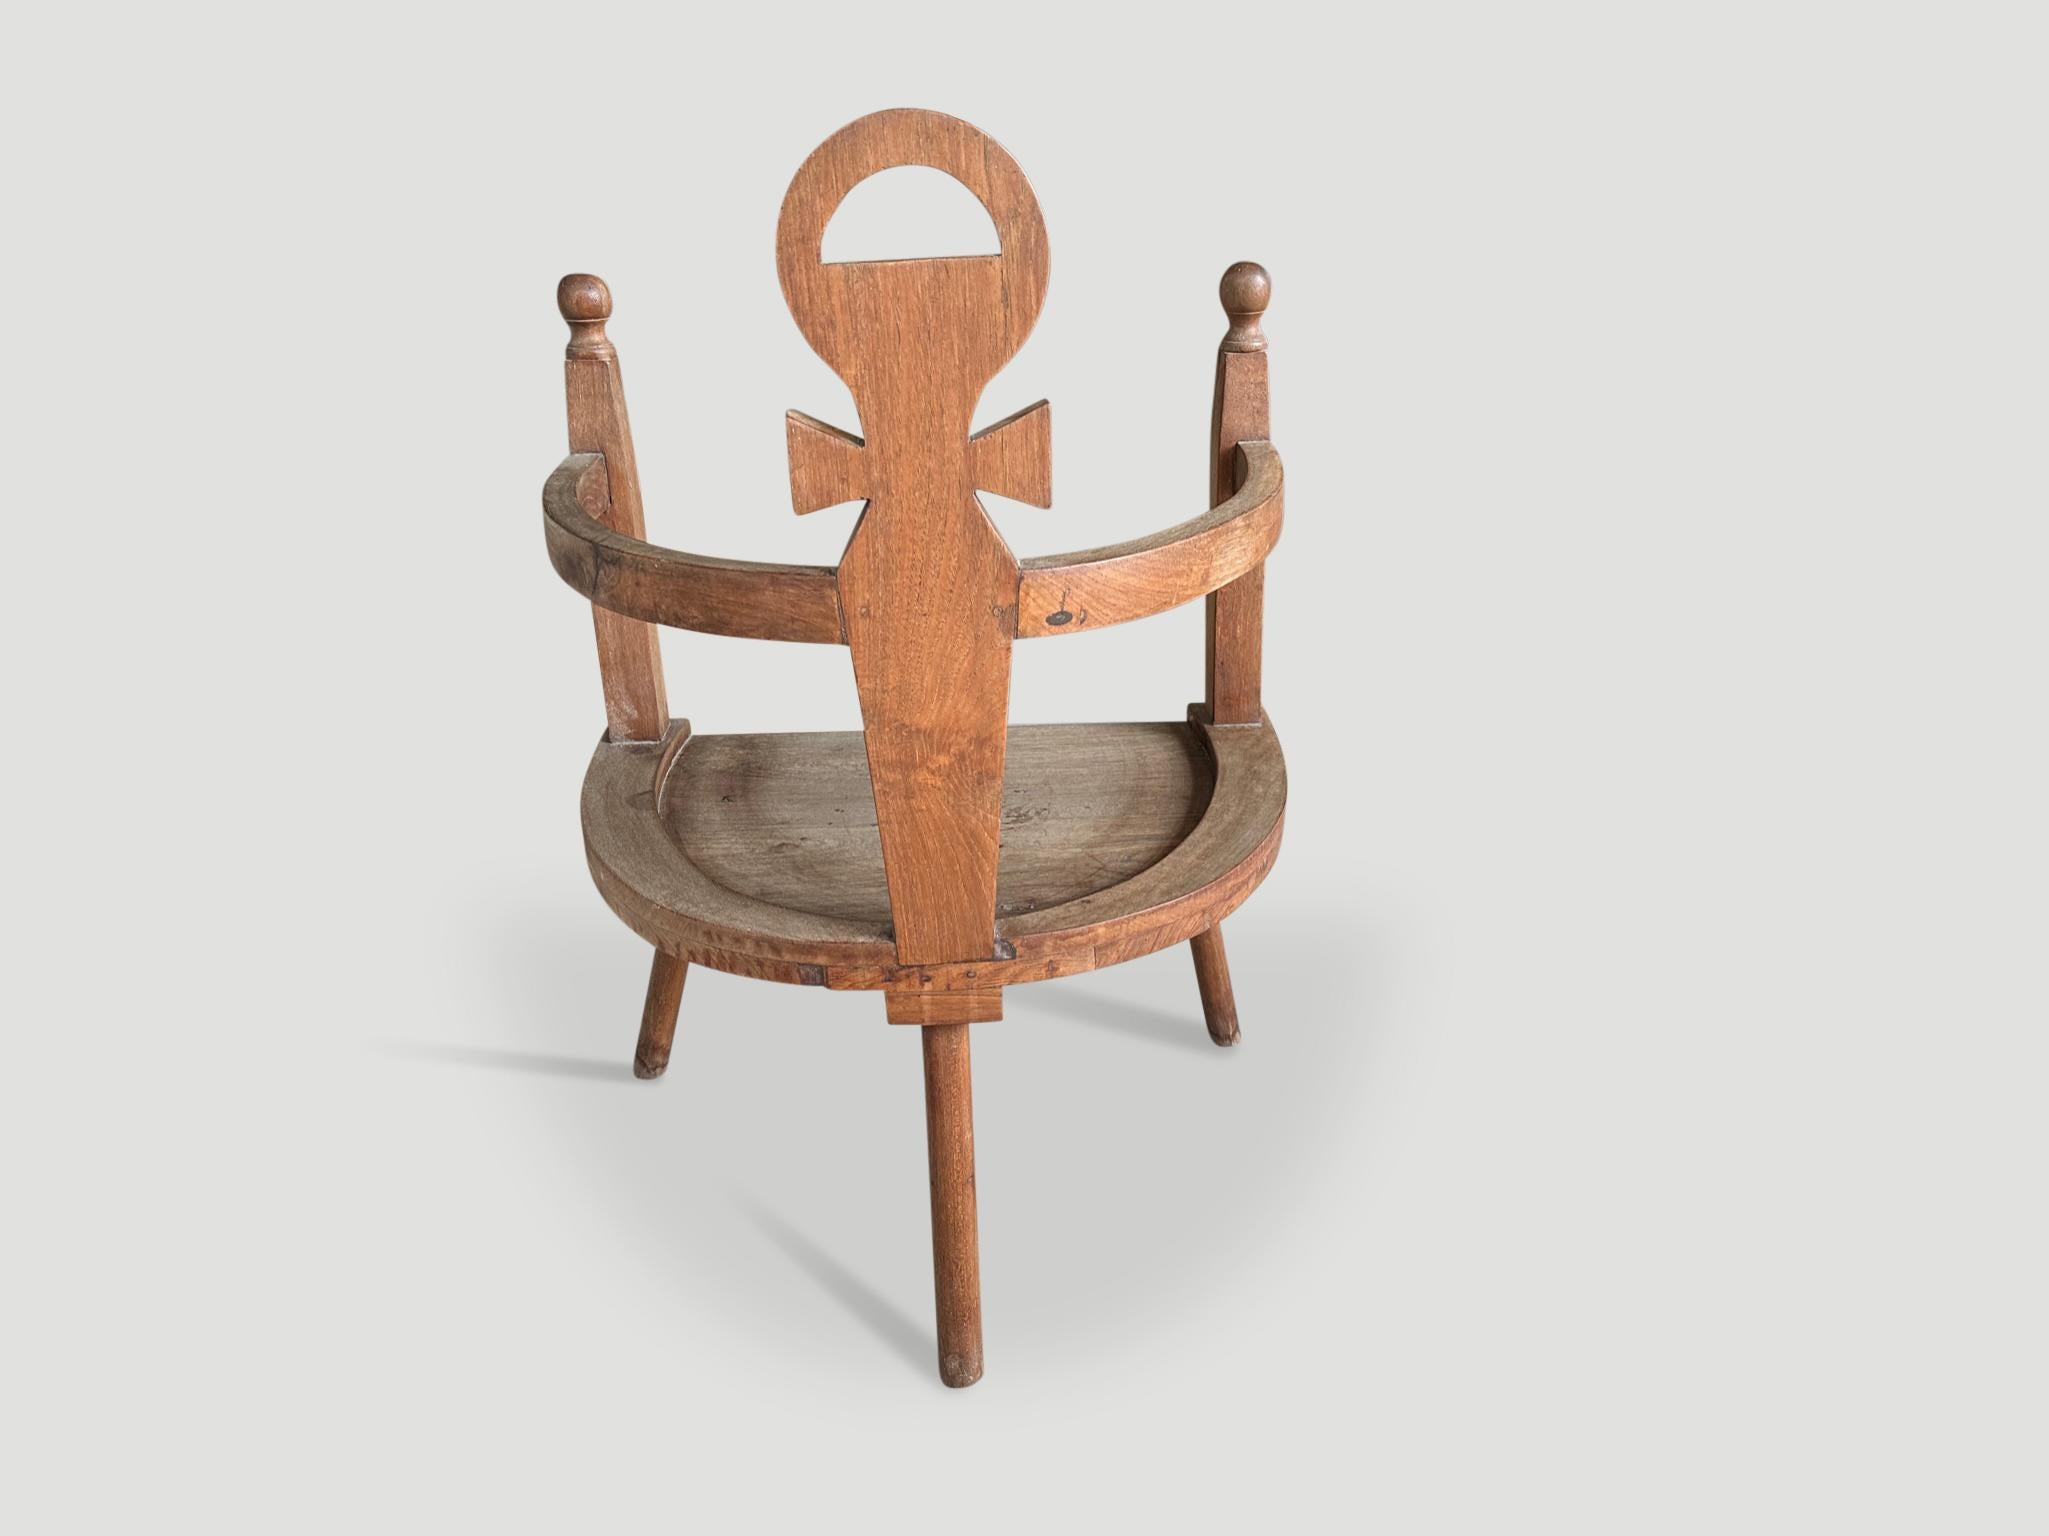 Andrianna Shamaris Antique Teak Wood Decorative Chair In Excellent Condition For Sale In New York, NY